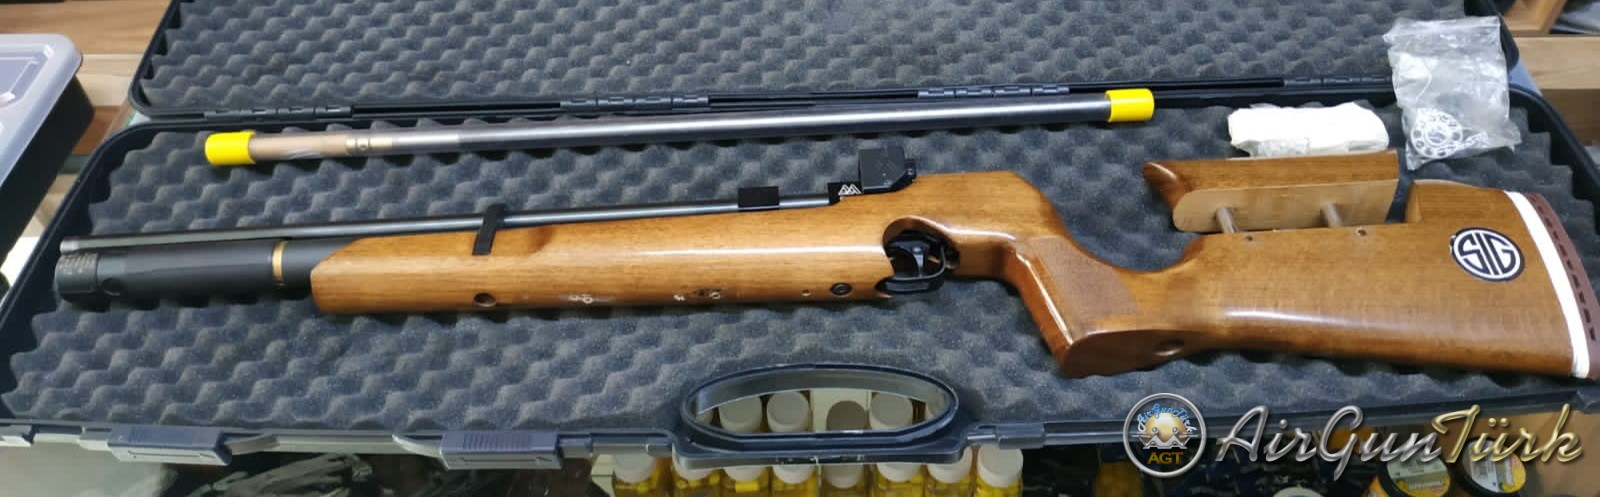 Airarms S200